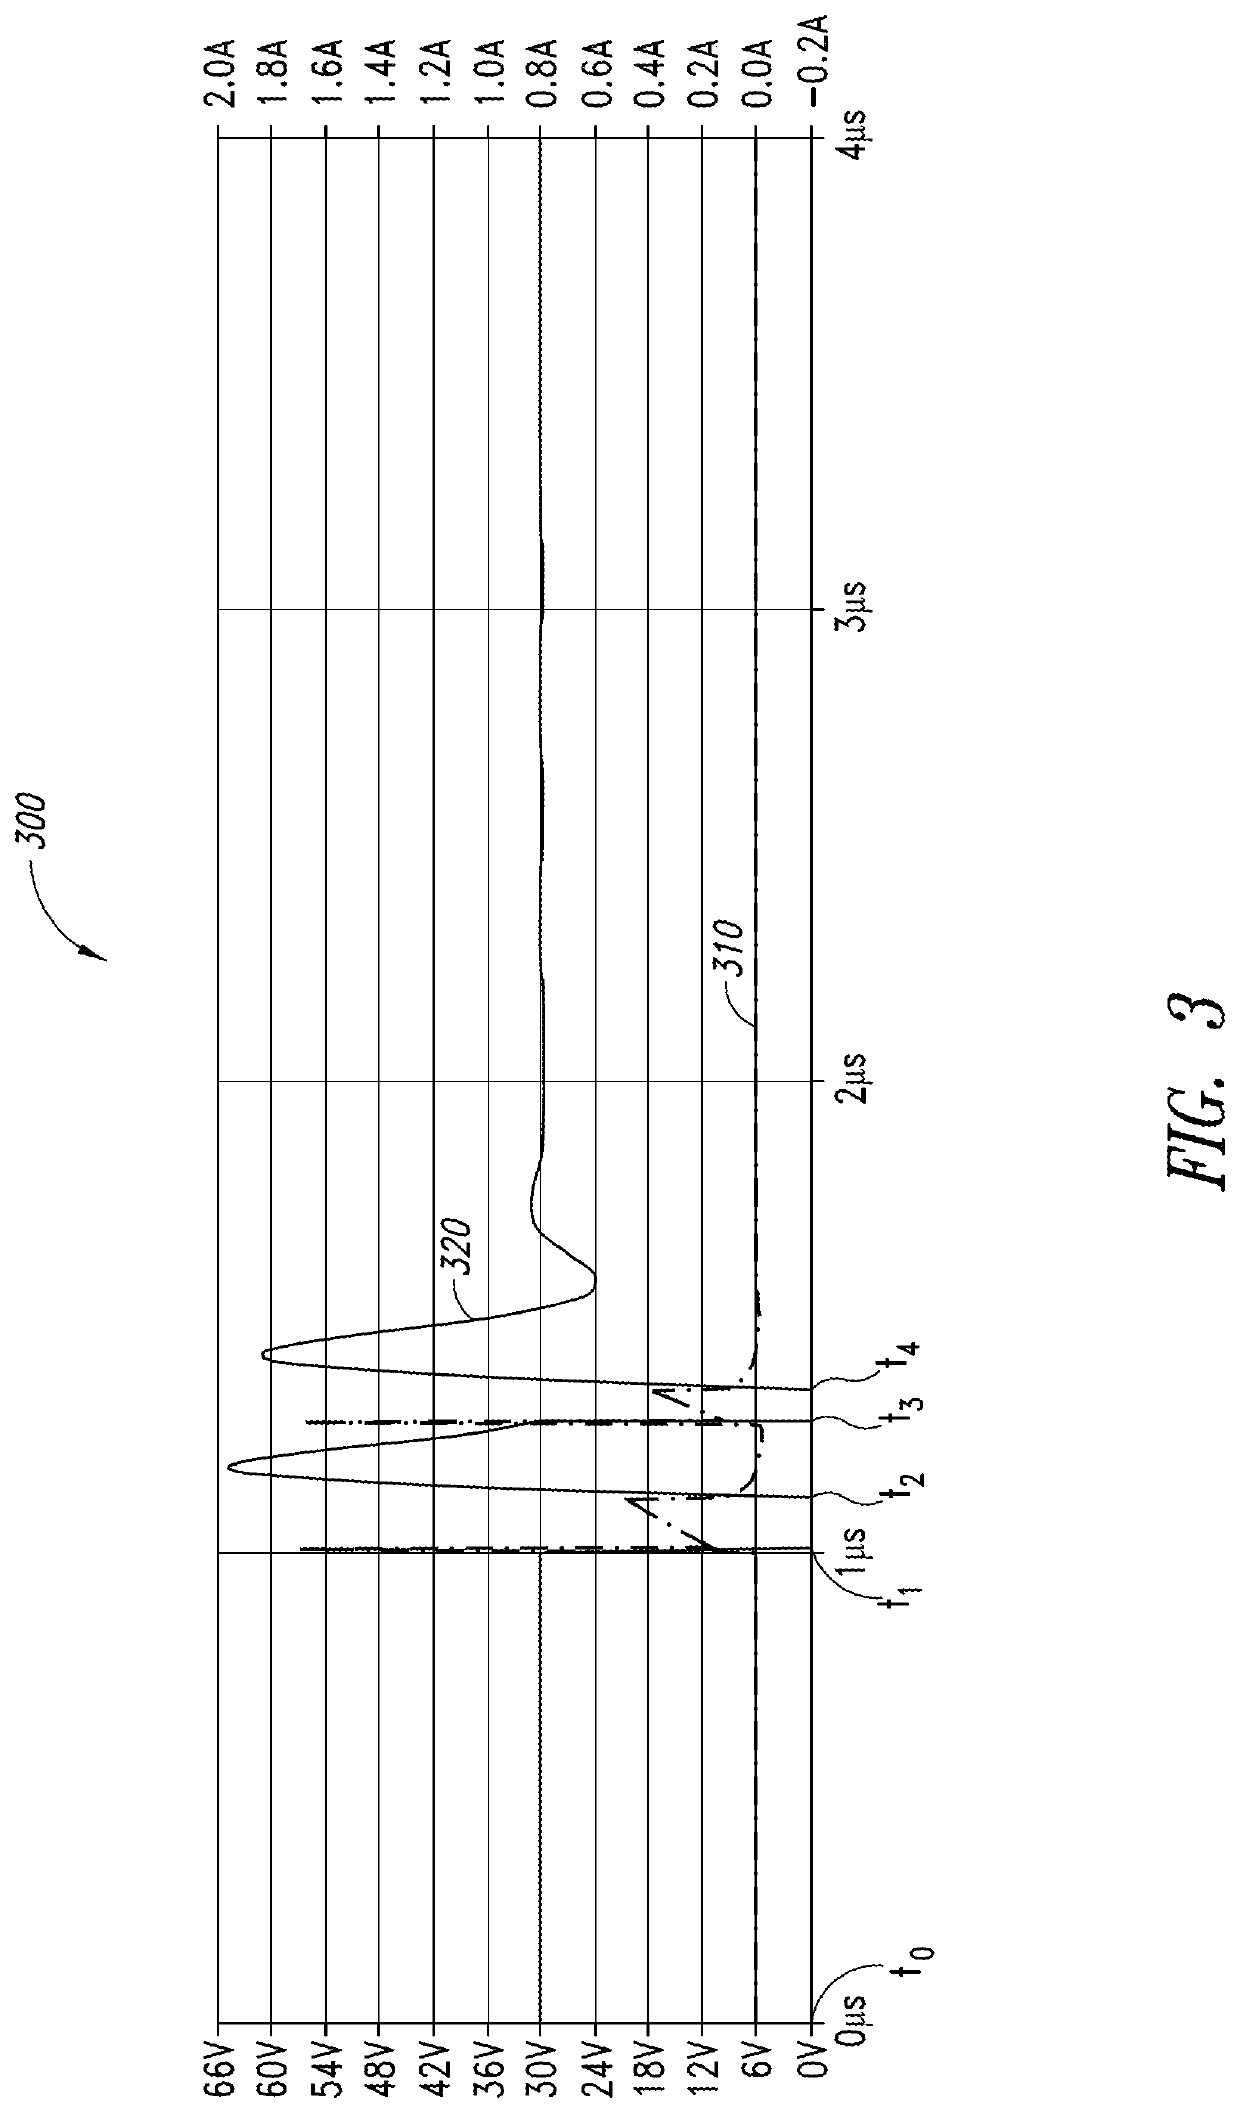 Systems and methods for ultrasound pulse generation using gallium nitride field effect transistors